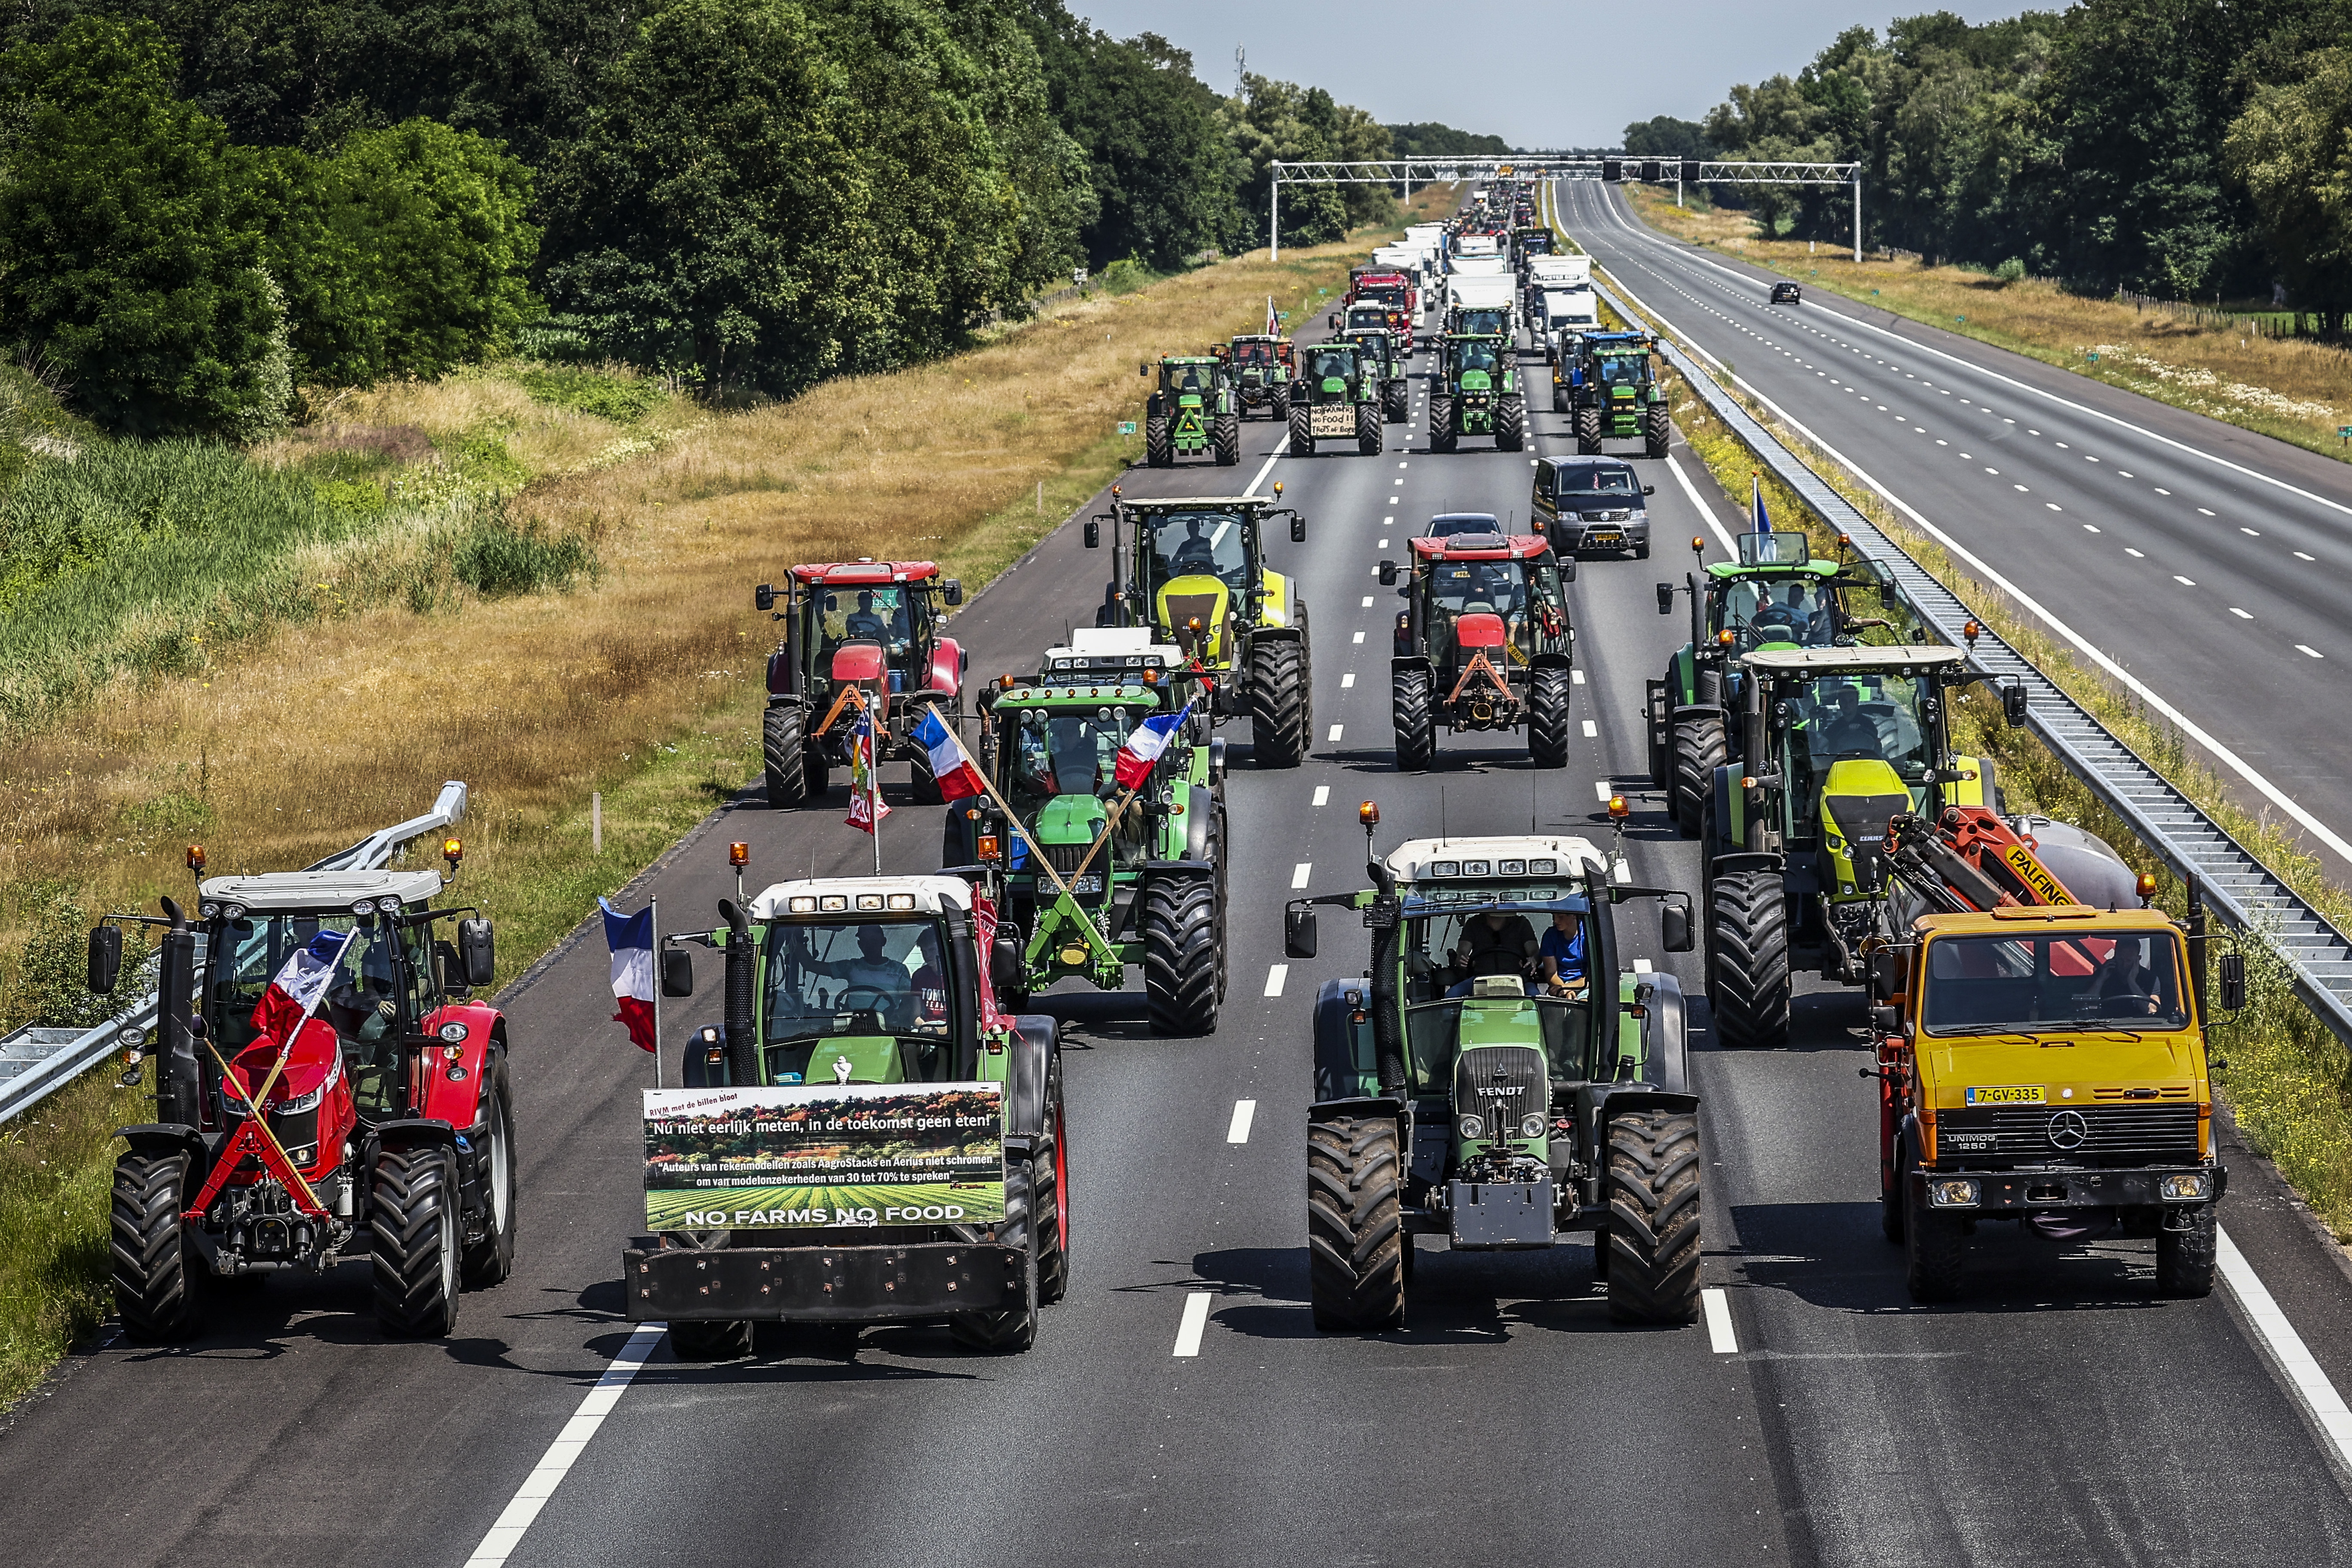 Jan Douwe van der Ploeg on Right wing farmers’ protests in the Netherlands  Promo Image